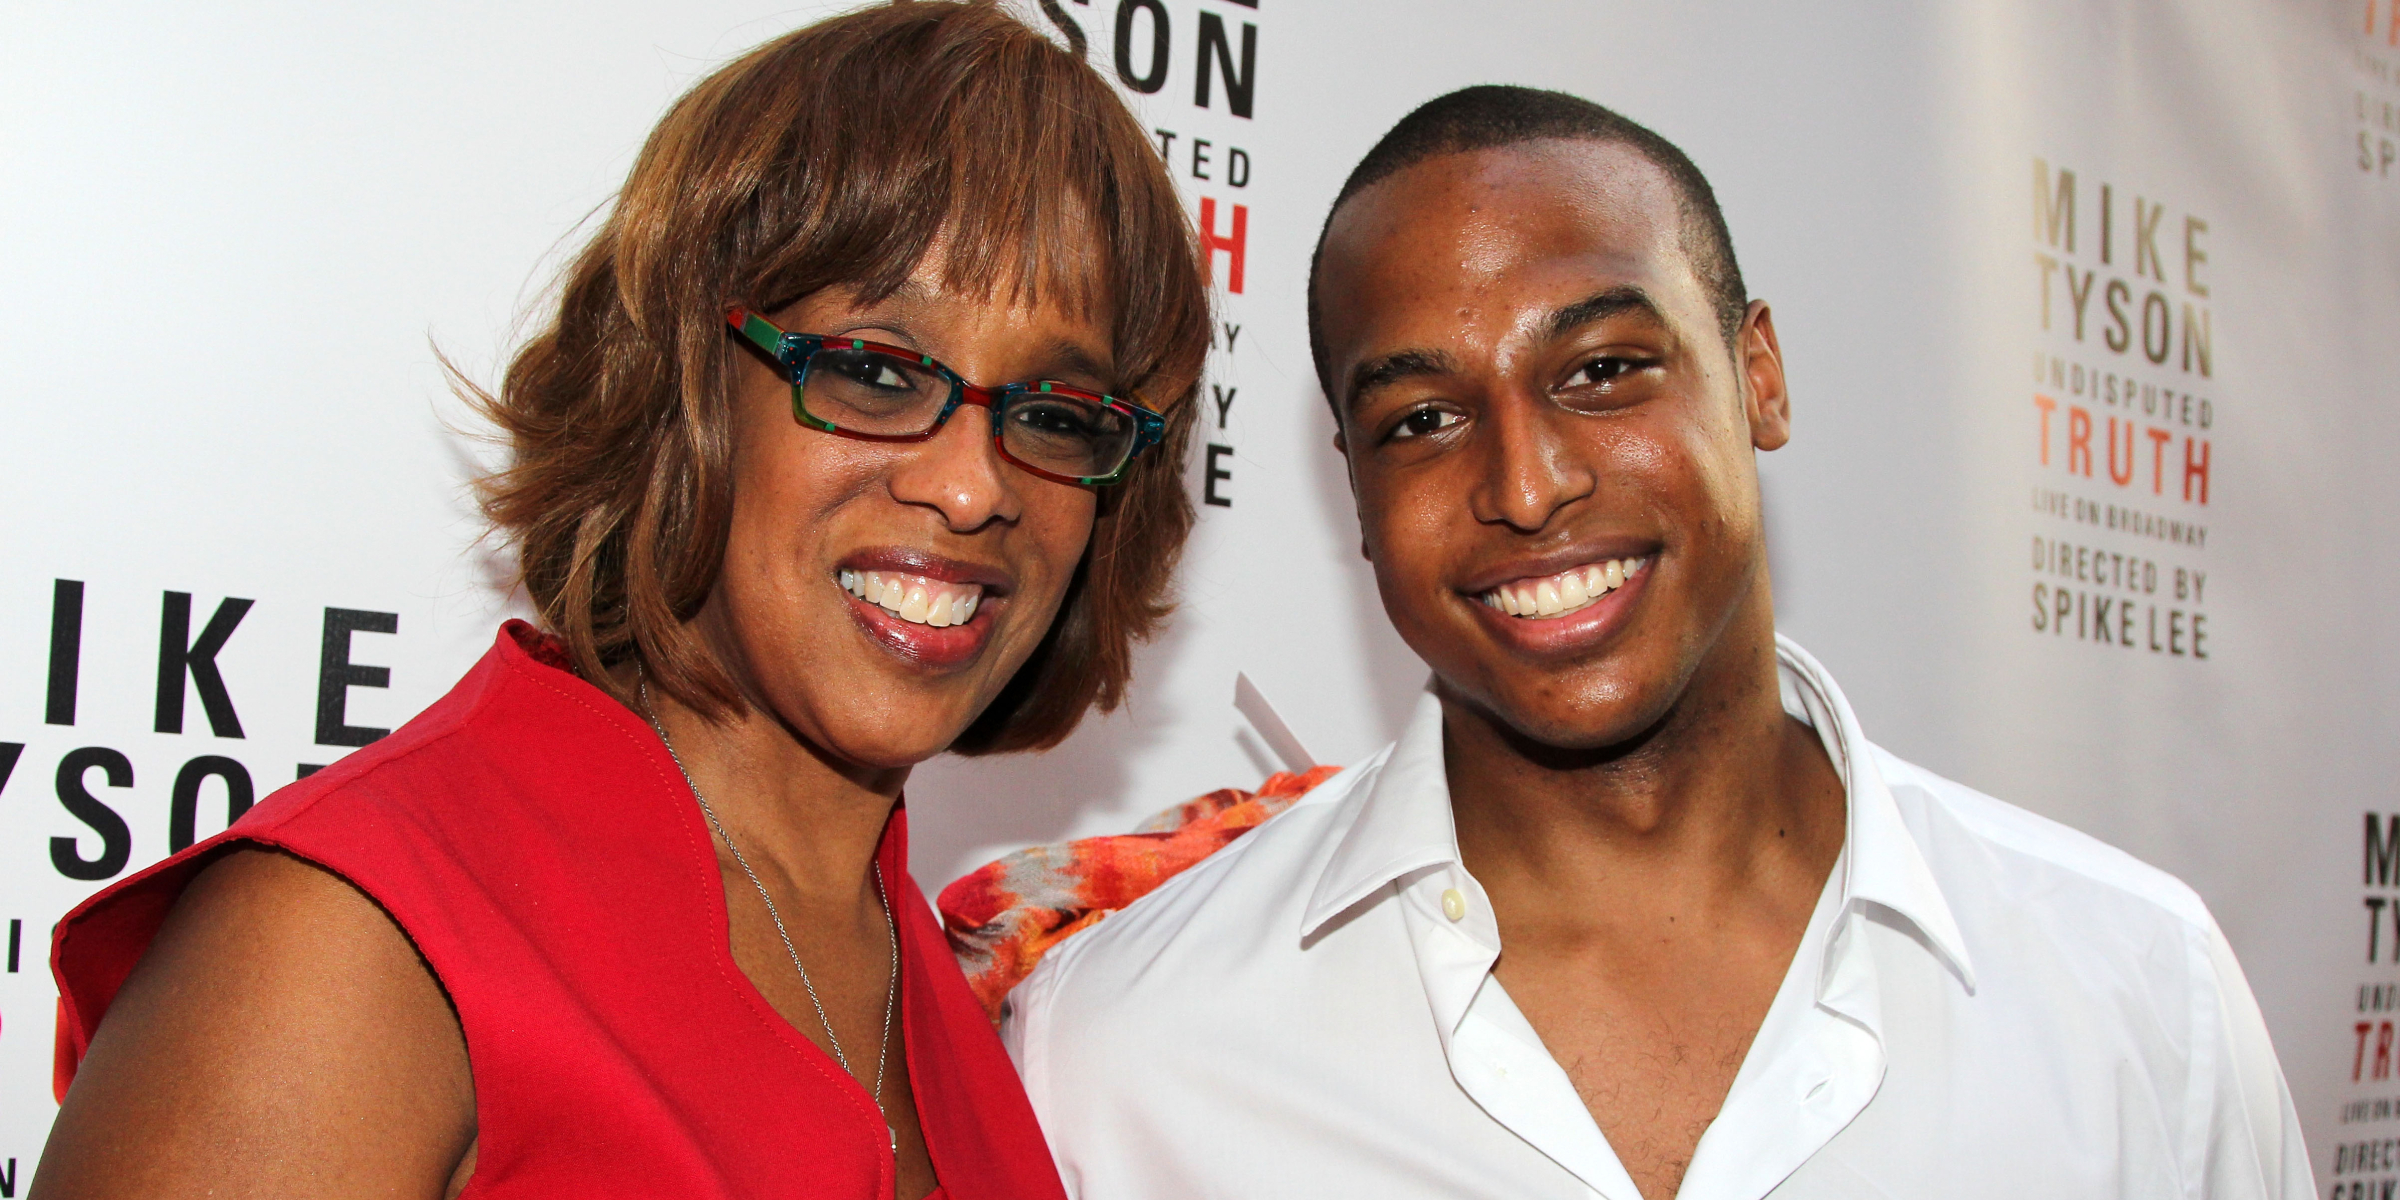 Gayle King and her son Will Bumpus | Source: Getty Images